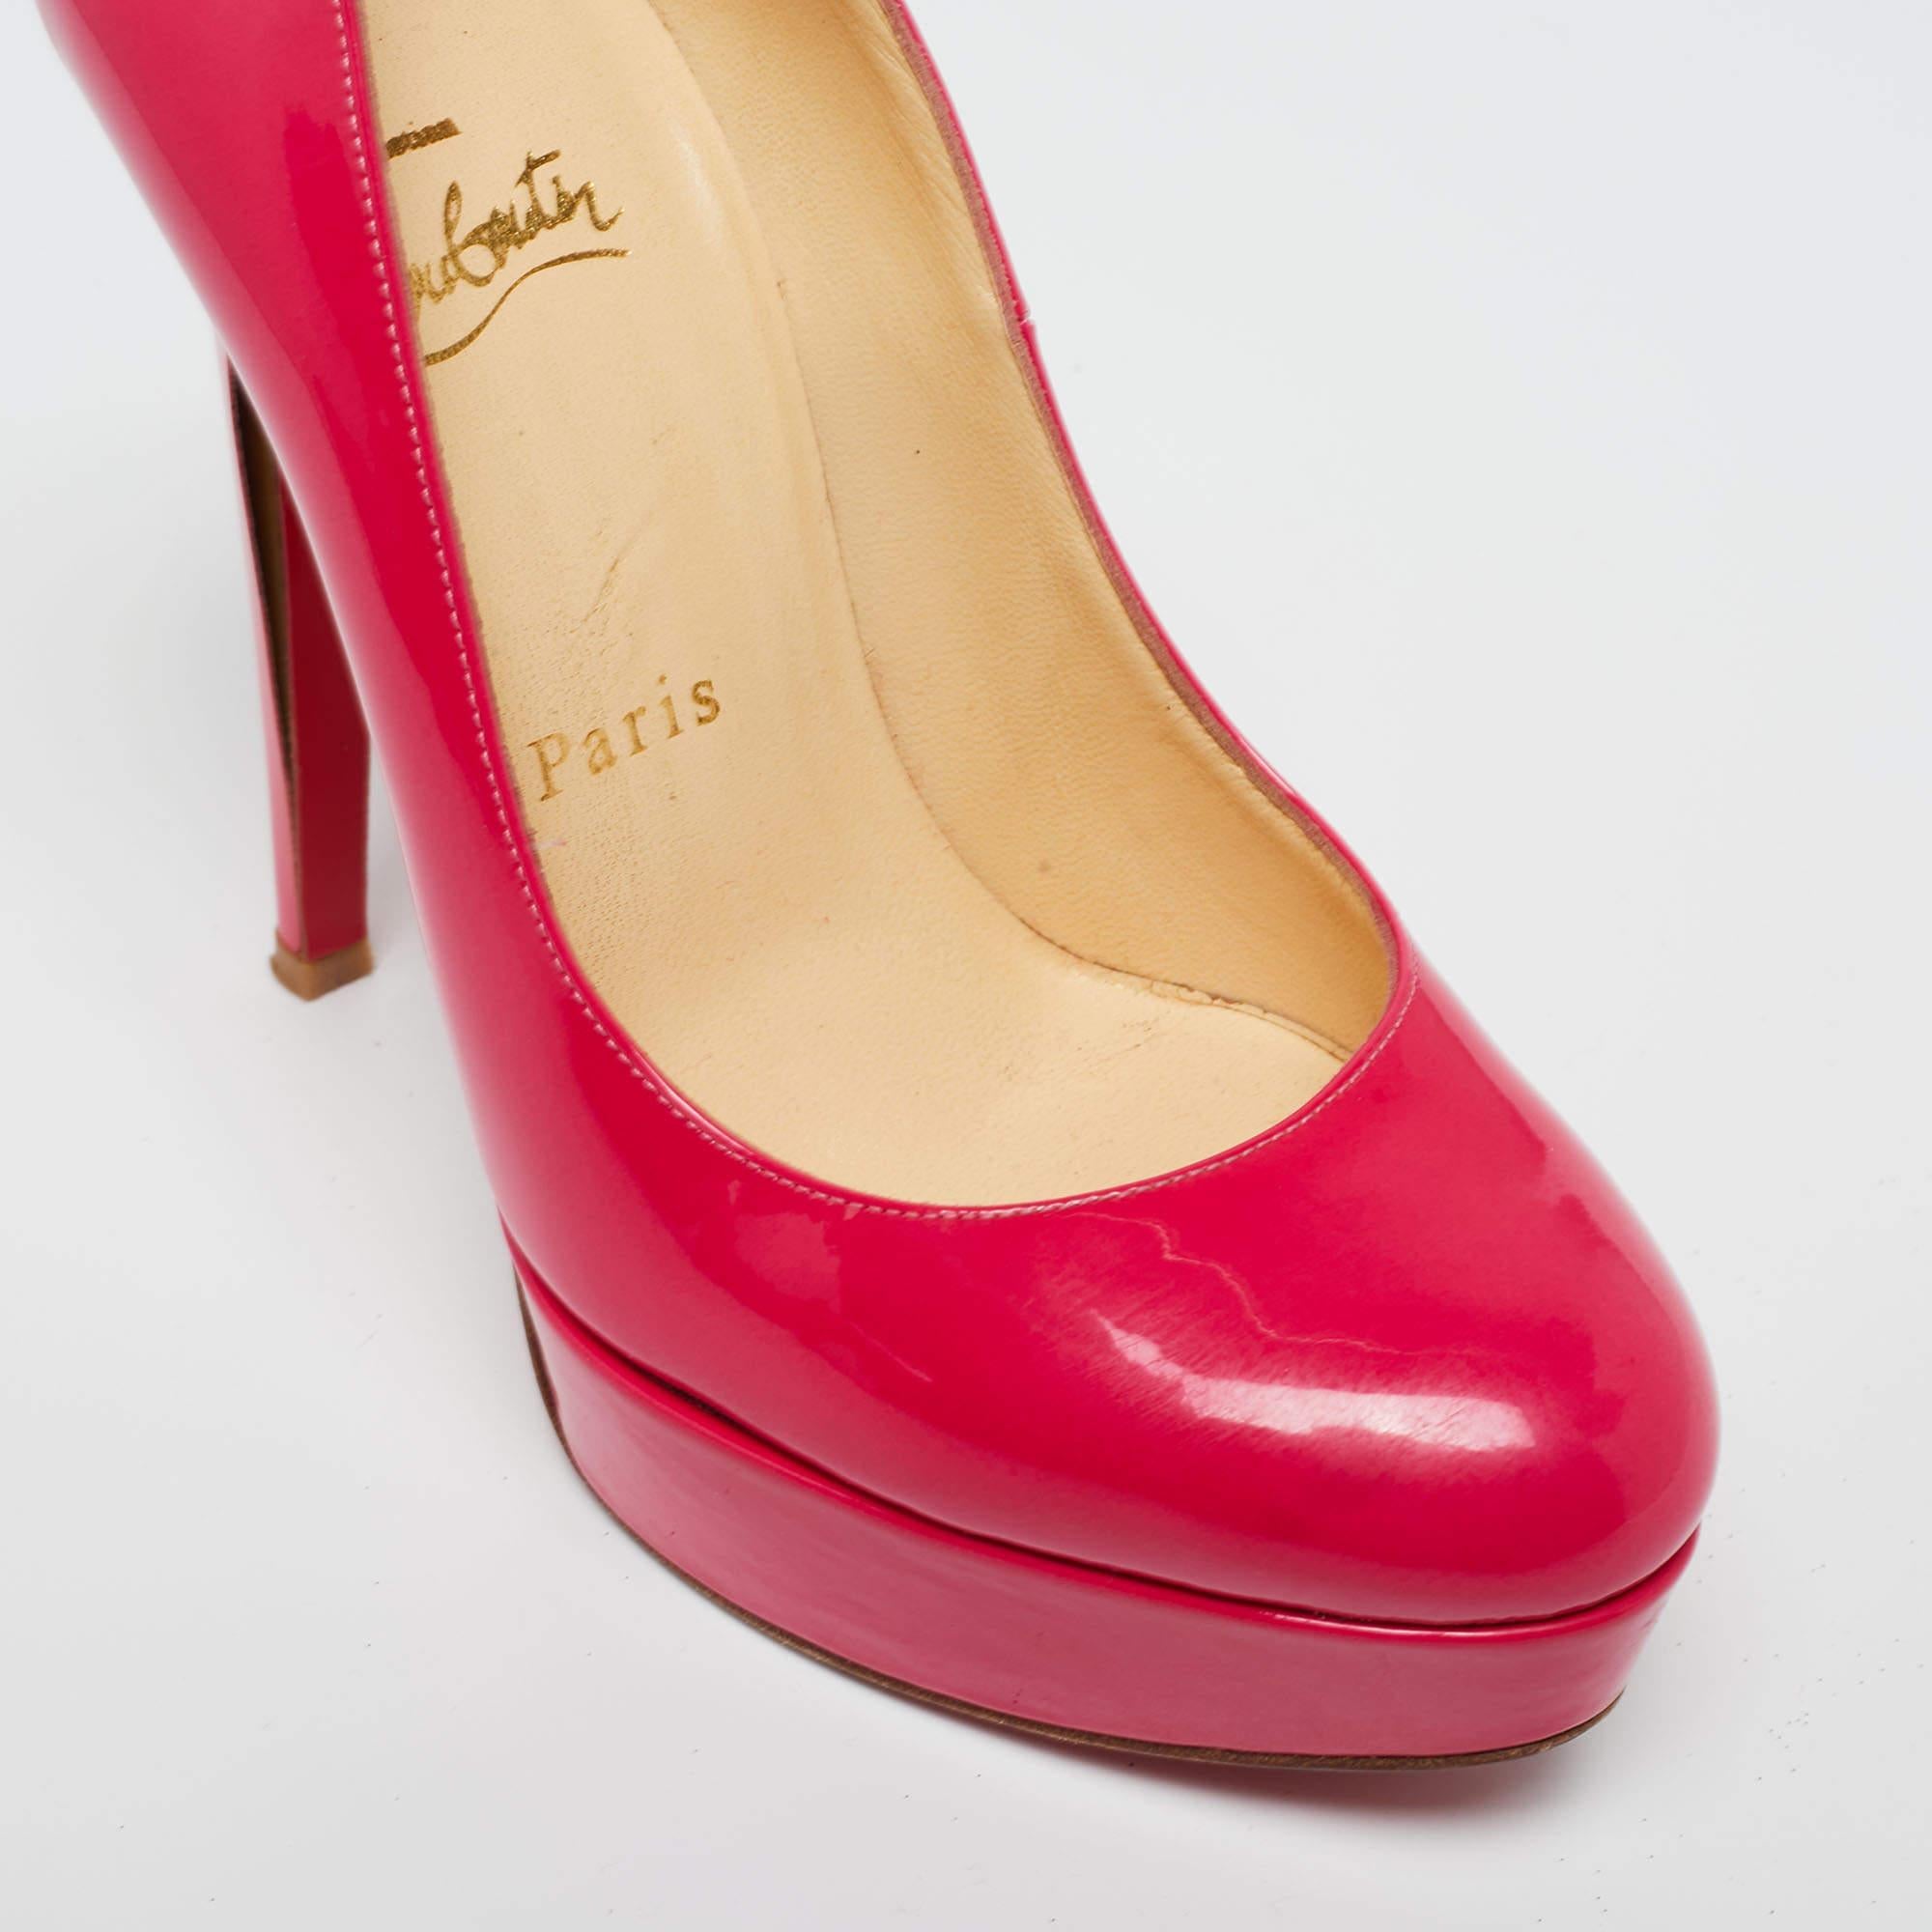 Christian Louboutin Neon Pink Patent Leather Bianca Pumps Size 36 For Sale 1